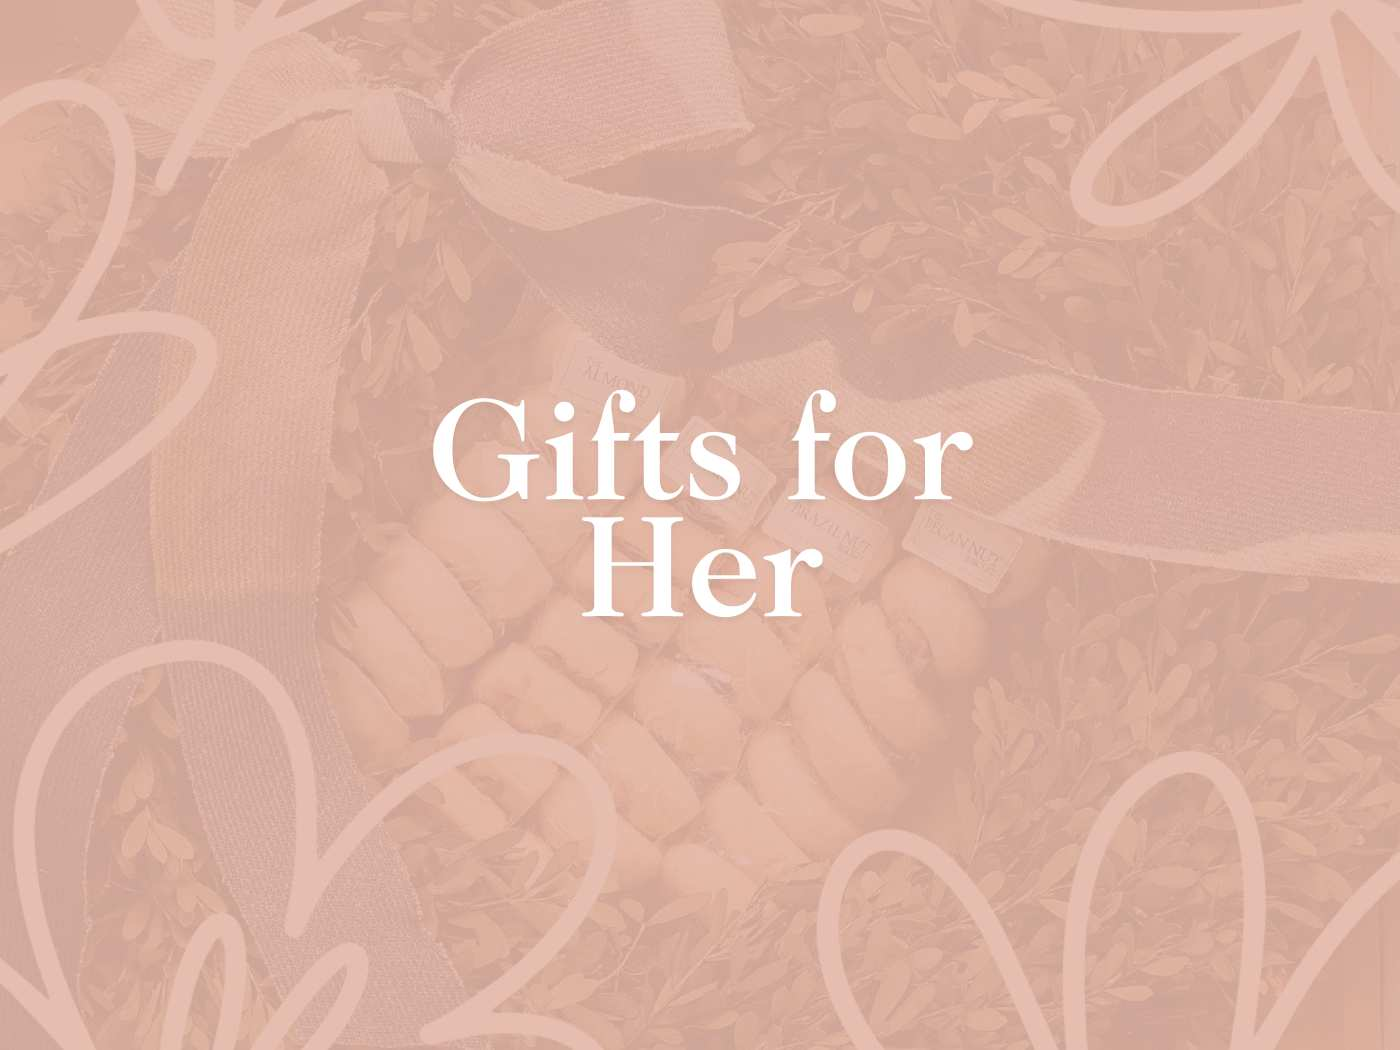 Text reading 'Gifts for Her' overlays a pink background with floral outlines, suggesting thoughtful gifts and care. Fabulous Flowers and Gifts. Gifts for Her.